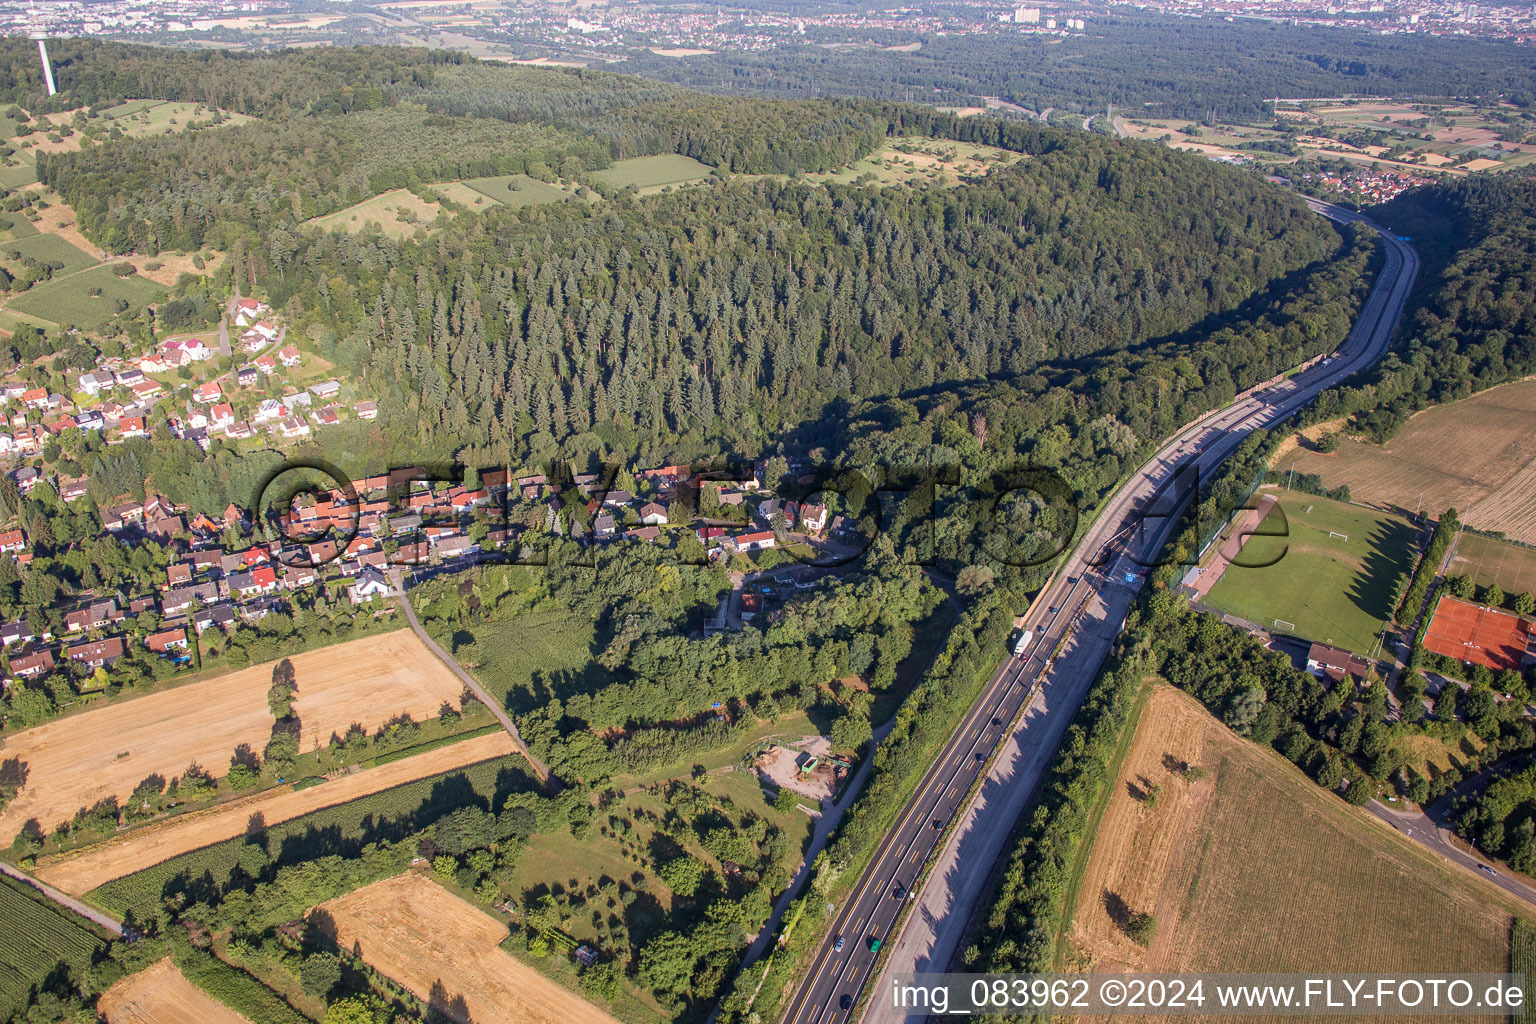 Aerial view of Highway route A8 in in the district Gruenwettersbach in Karlsruhe in the state Baden-Wurttemberg